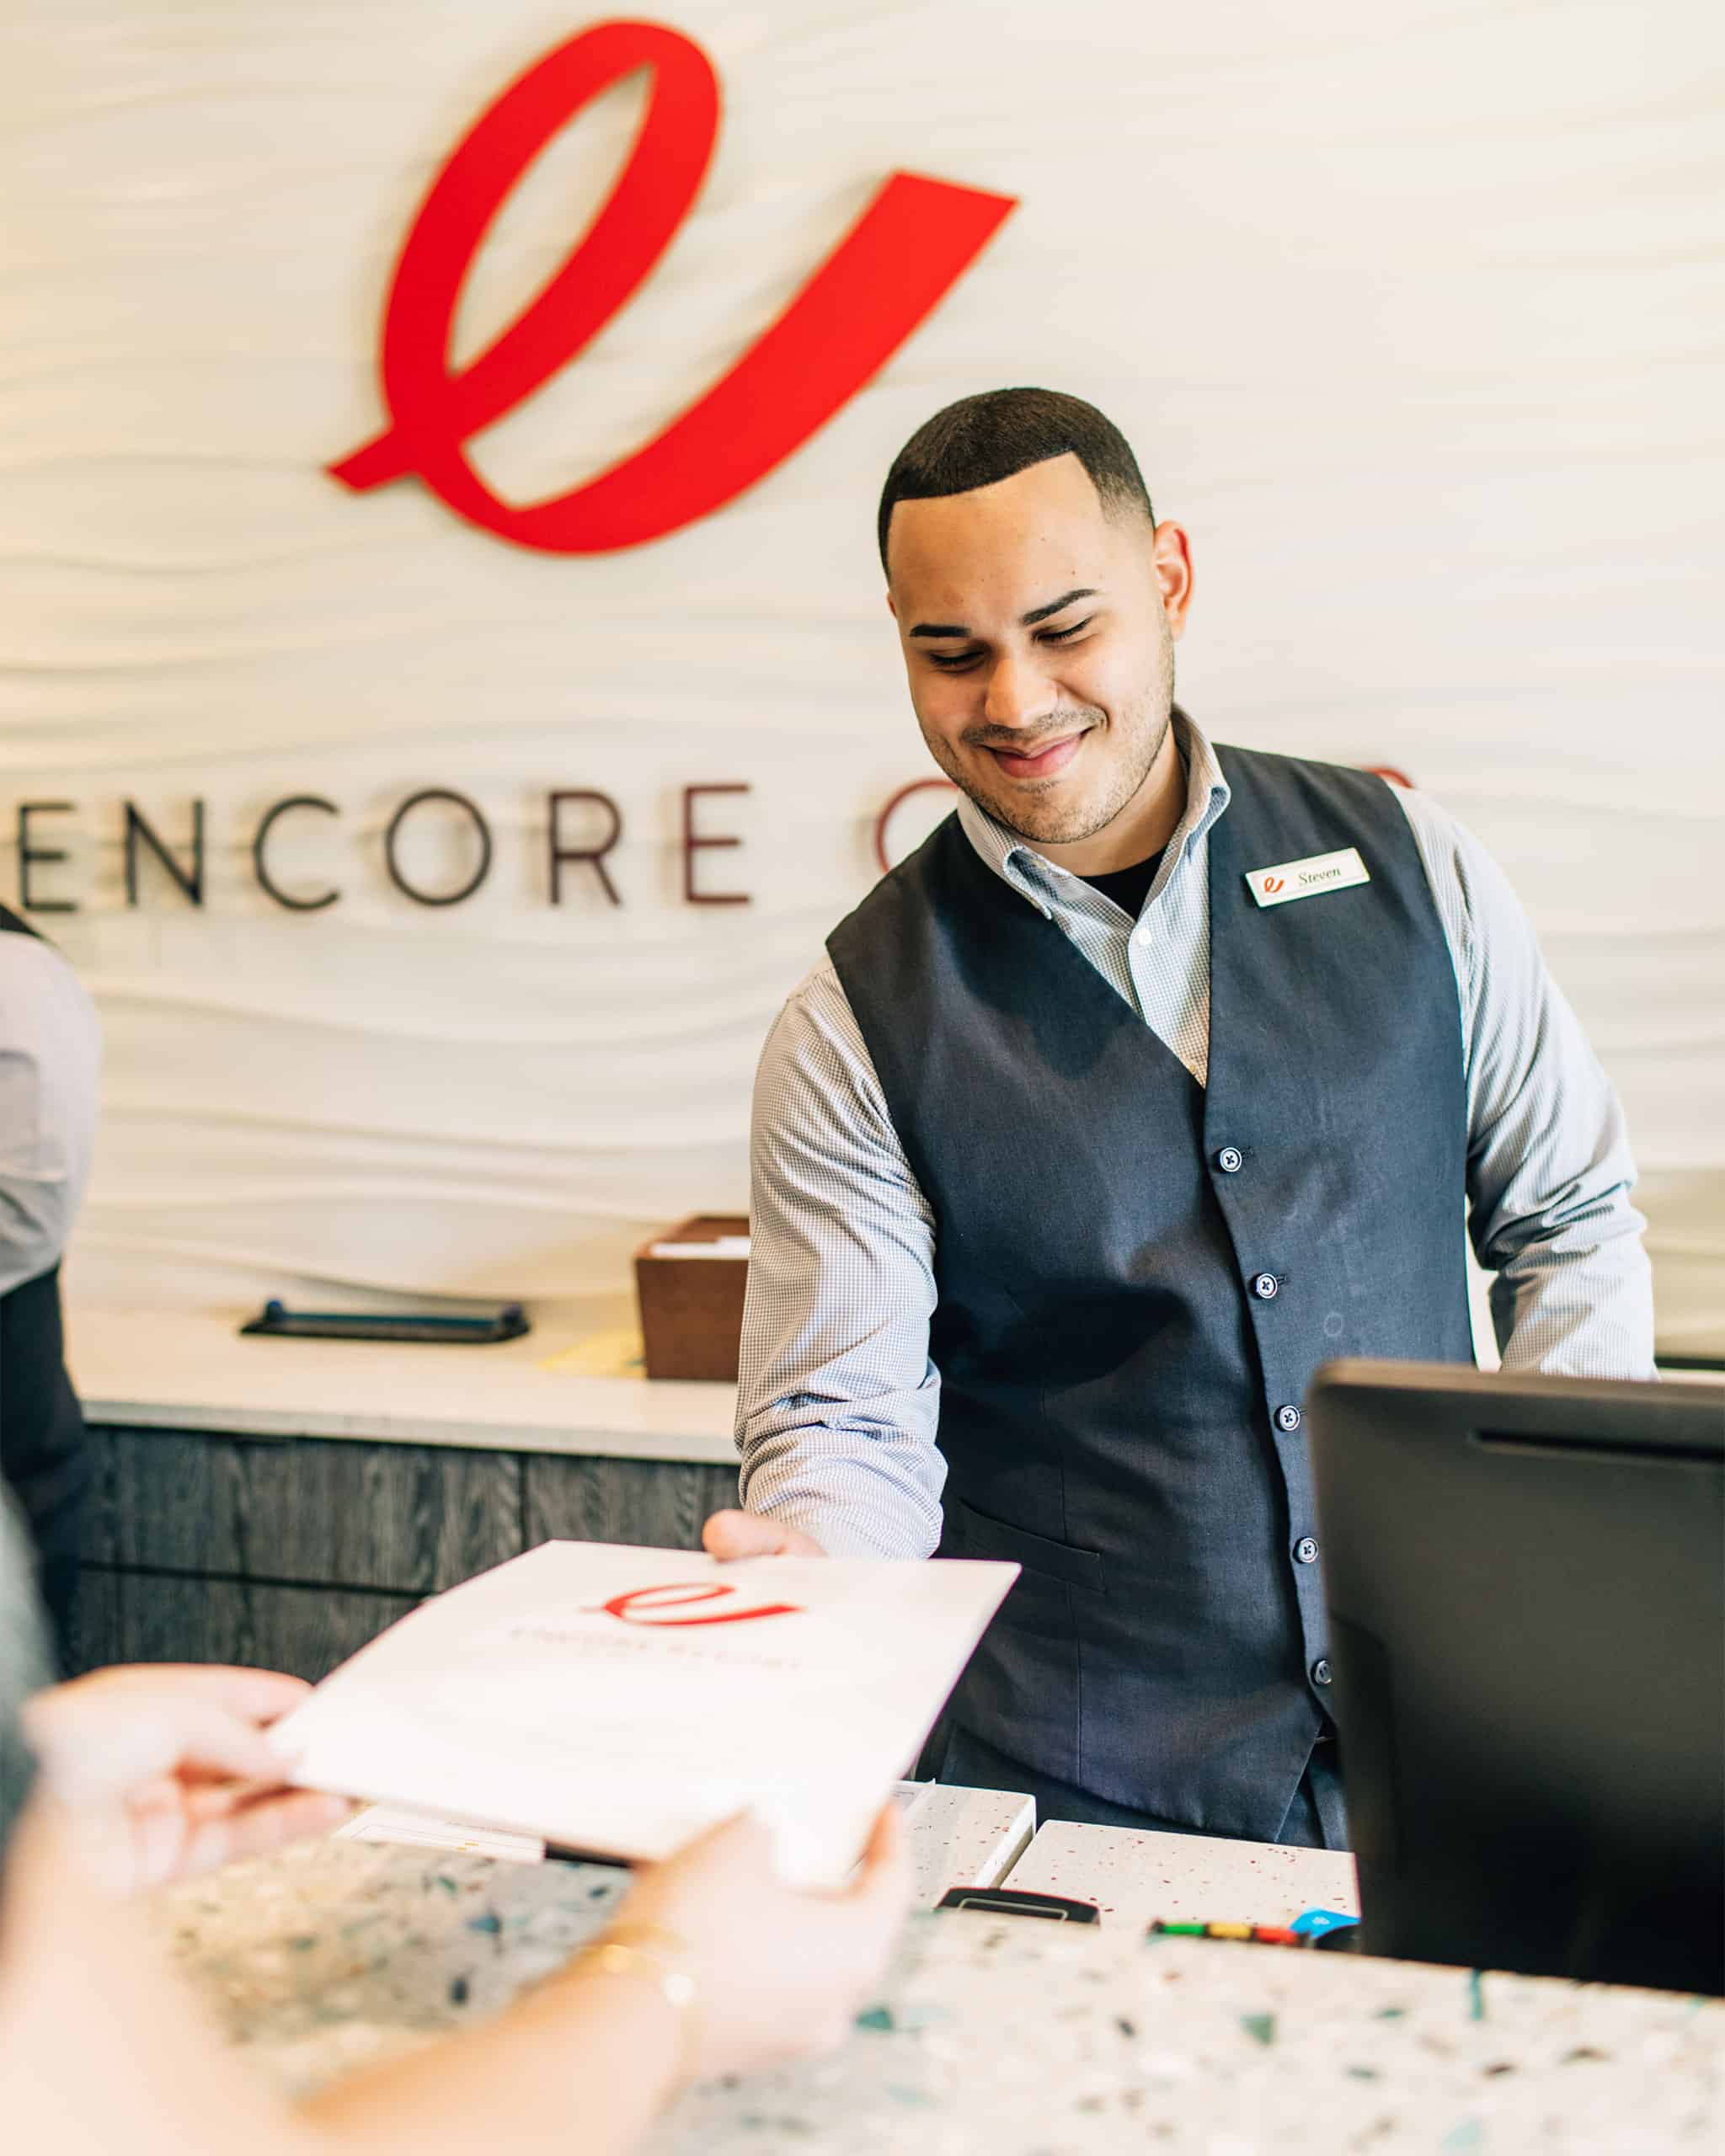 An Encore Resort concierge staff member smiles as he hands a guest information about their vacation home rental.